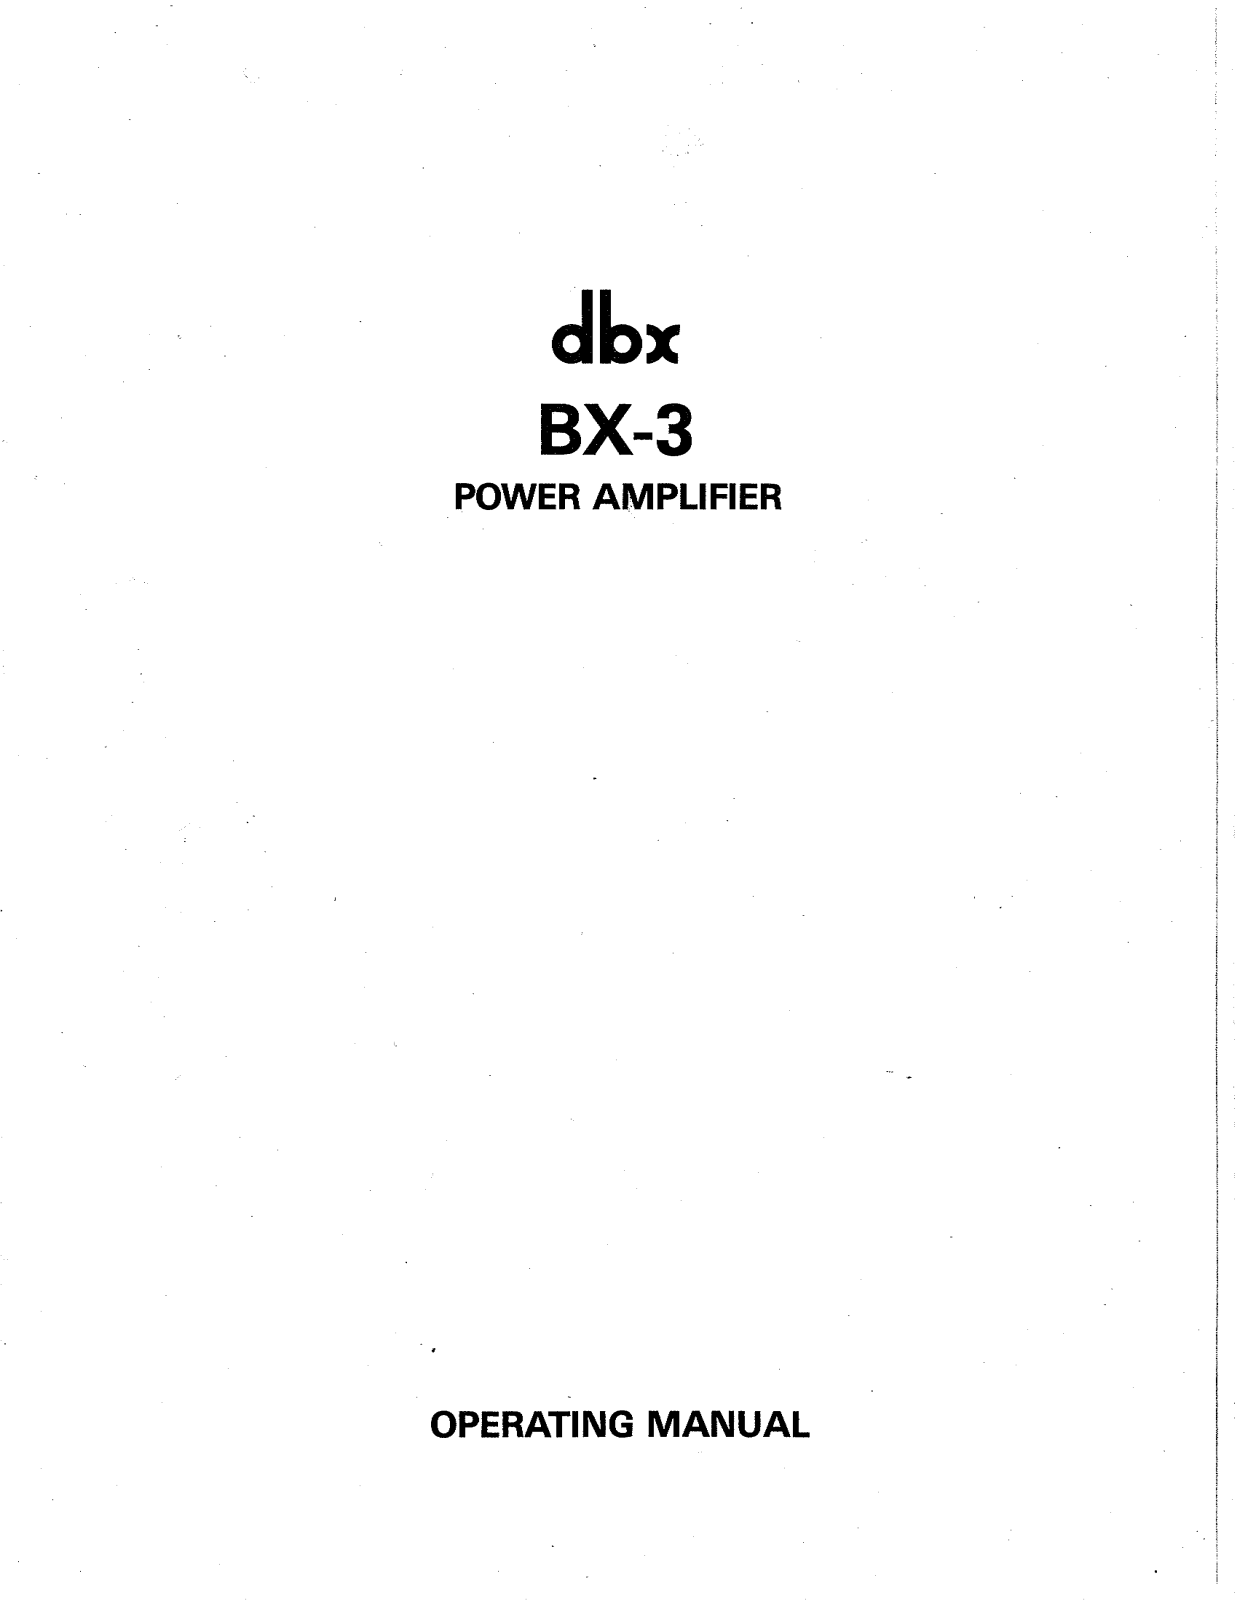 dbx BX-3 Owners manual